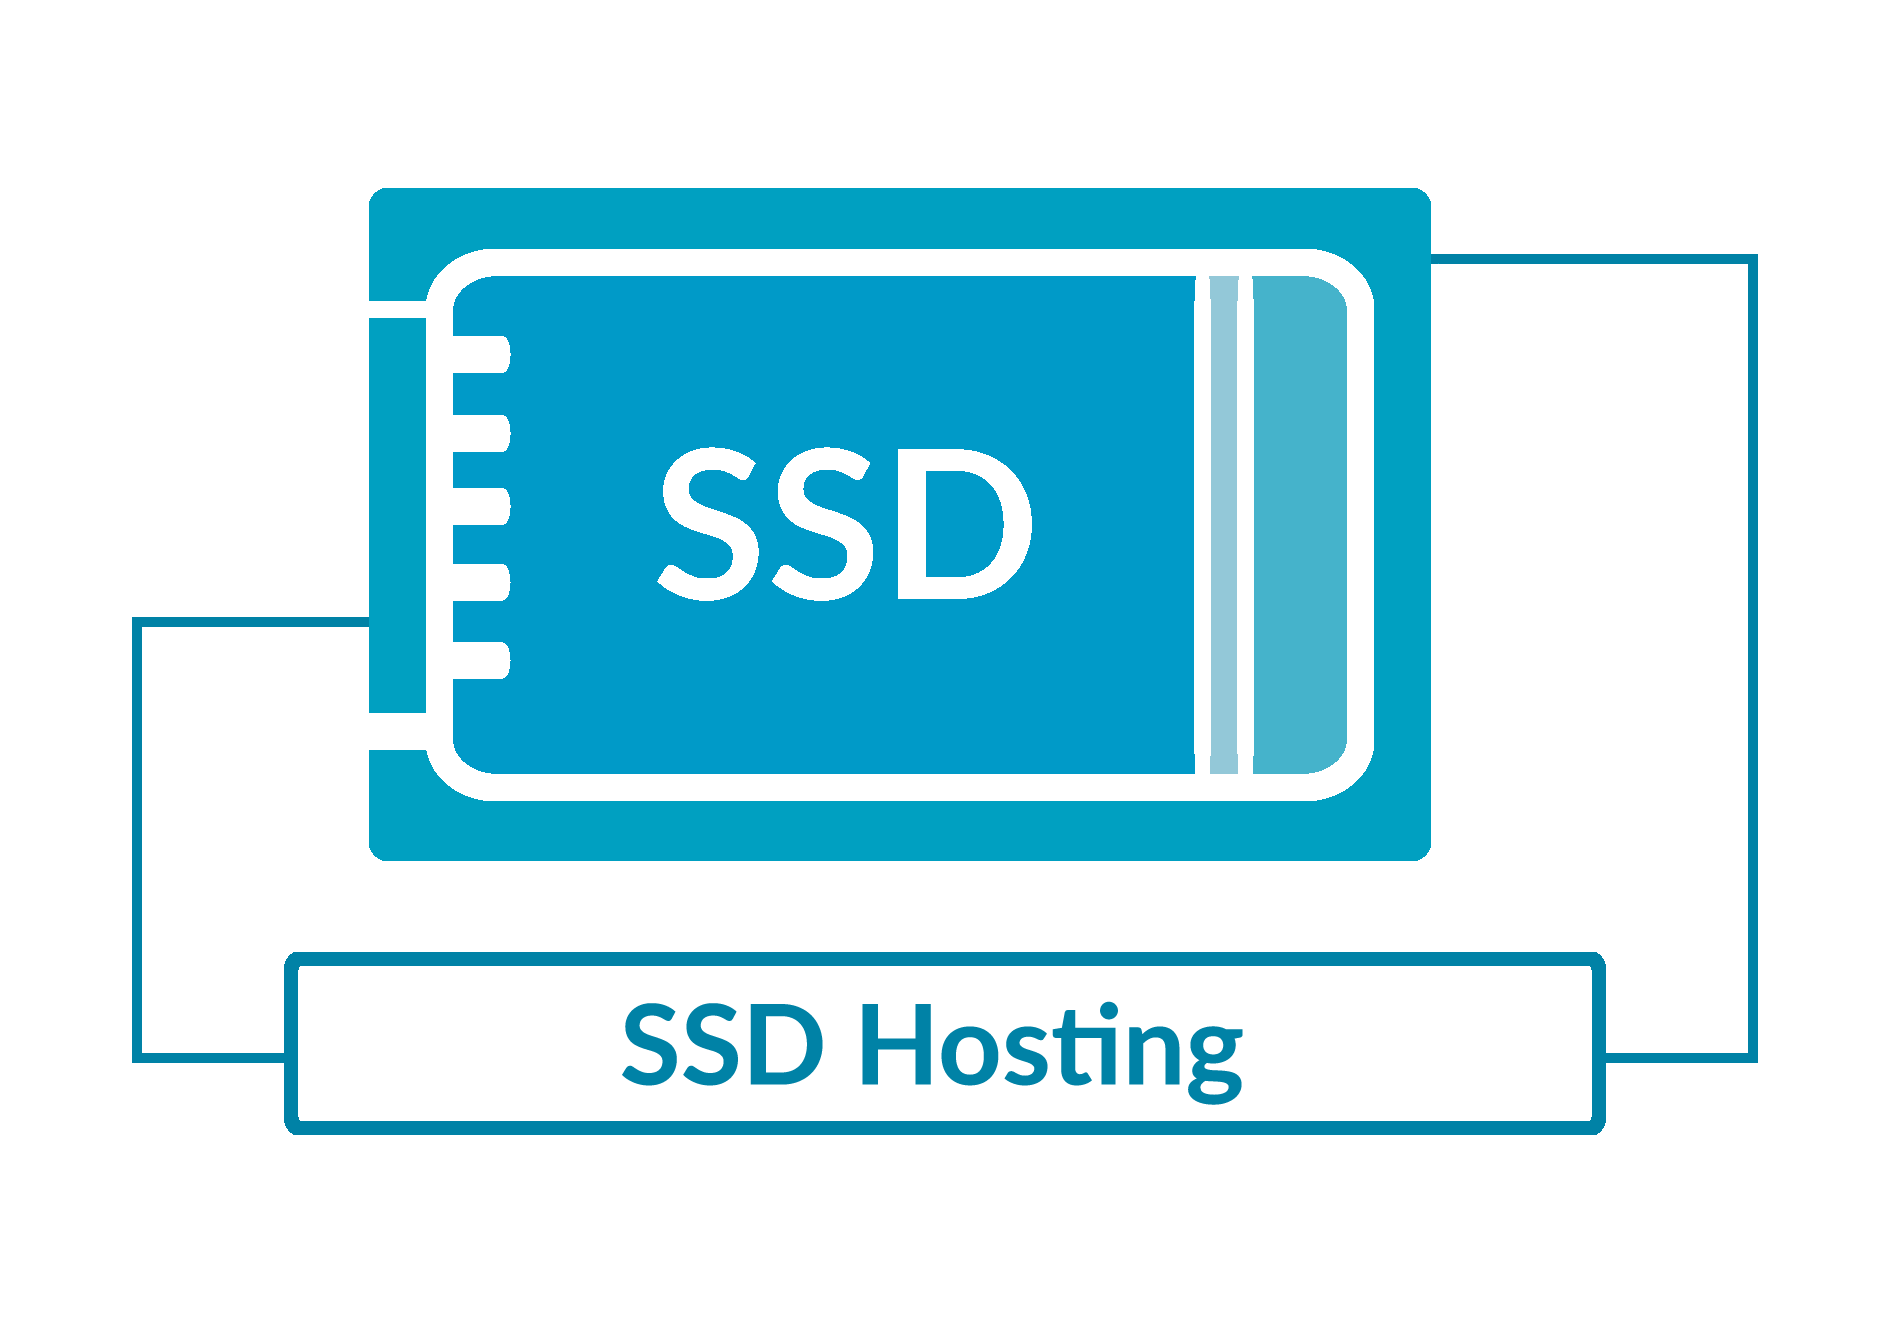 Hosting cPanel Cloud Servers with SSD Storage for $40 SEOClerks